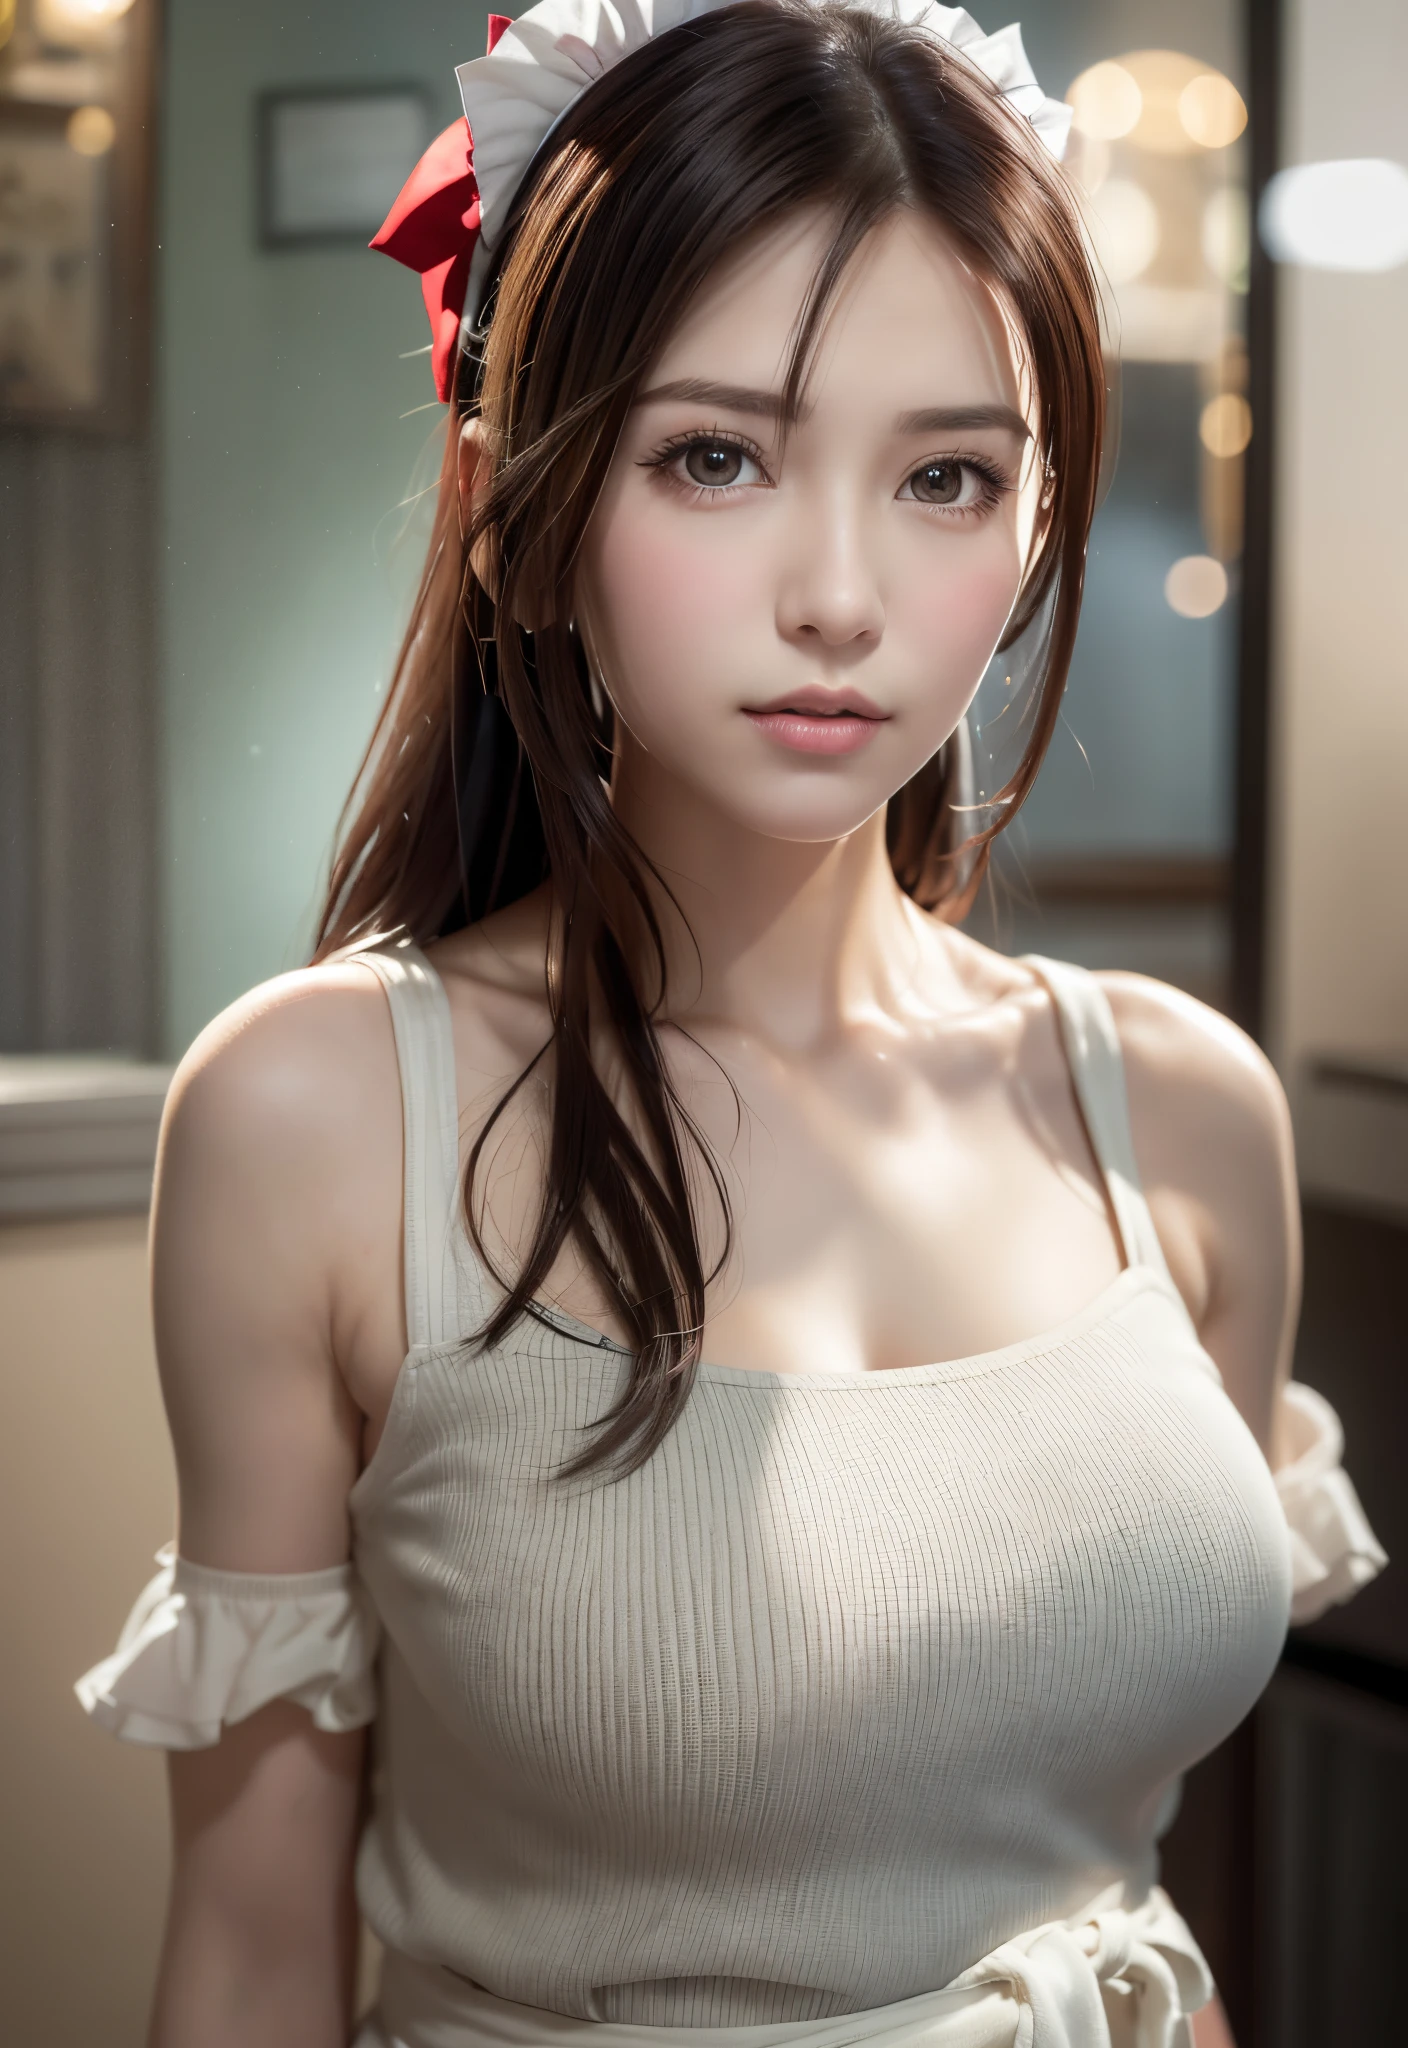 8K, of the highest quality, masutepiece:1.2), (Realistic, Photorealsitic:1.37), of the highest quality, masutepiece, Beautiful young woman, Pensive expression,、A charming、and an inviting look, Cute Maid Clothes, Hair tied back, Cinematic background, Light skin tone、Ko Shibasaki